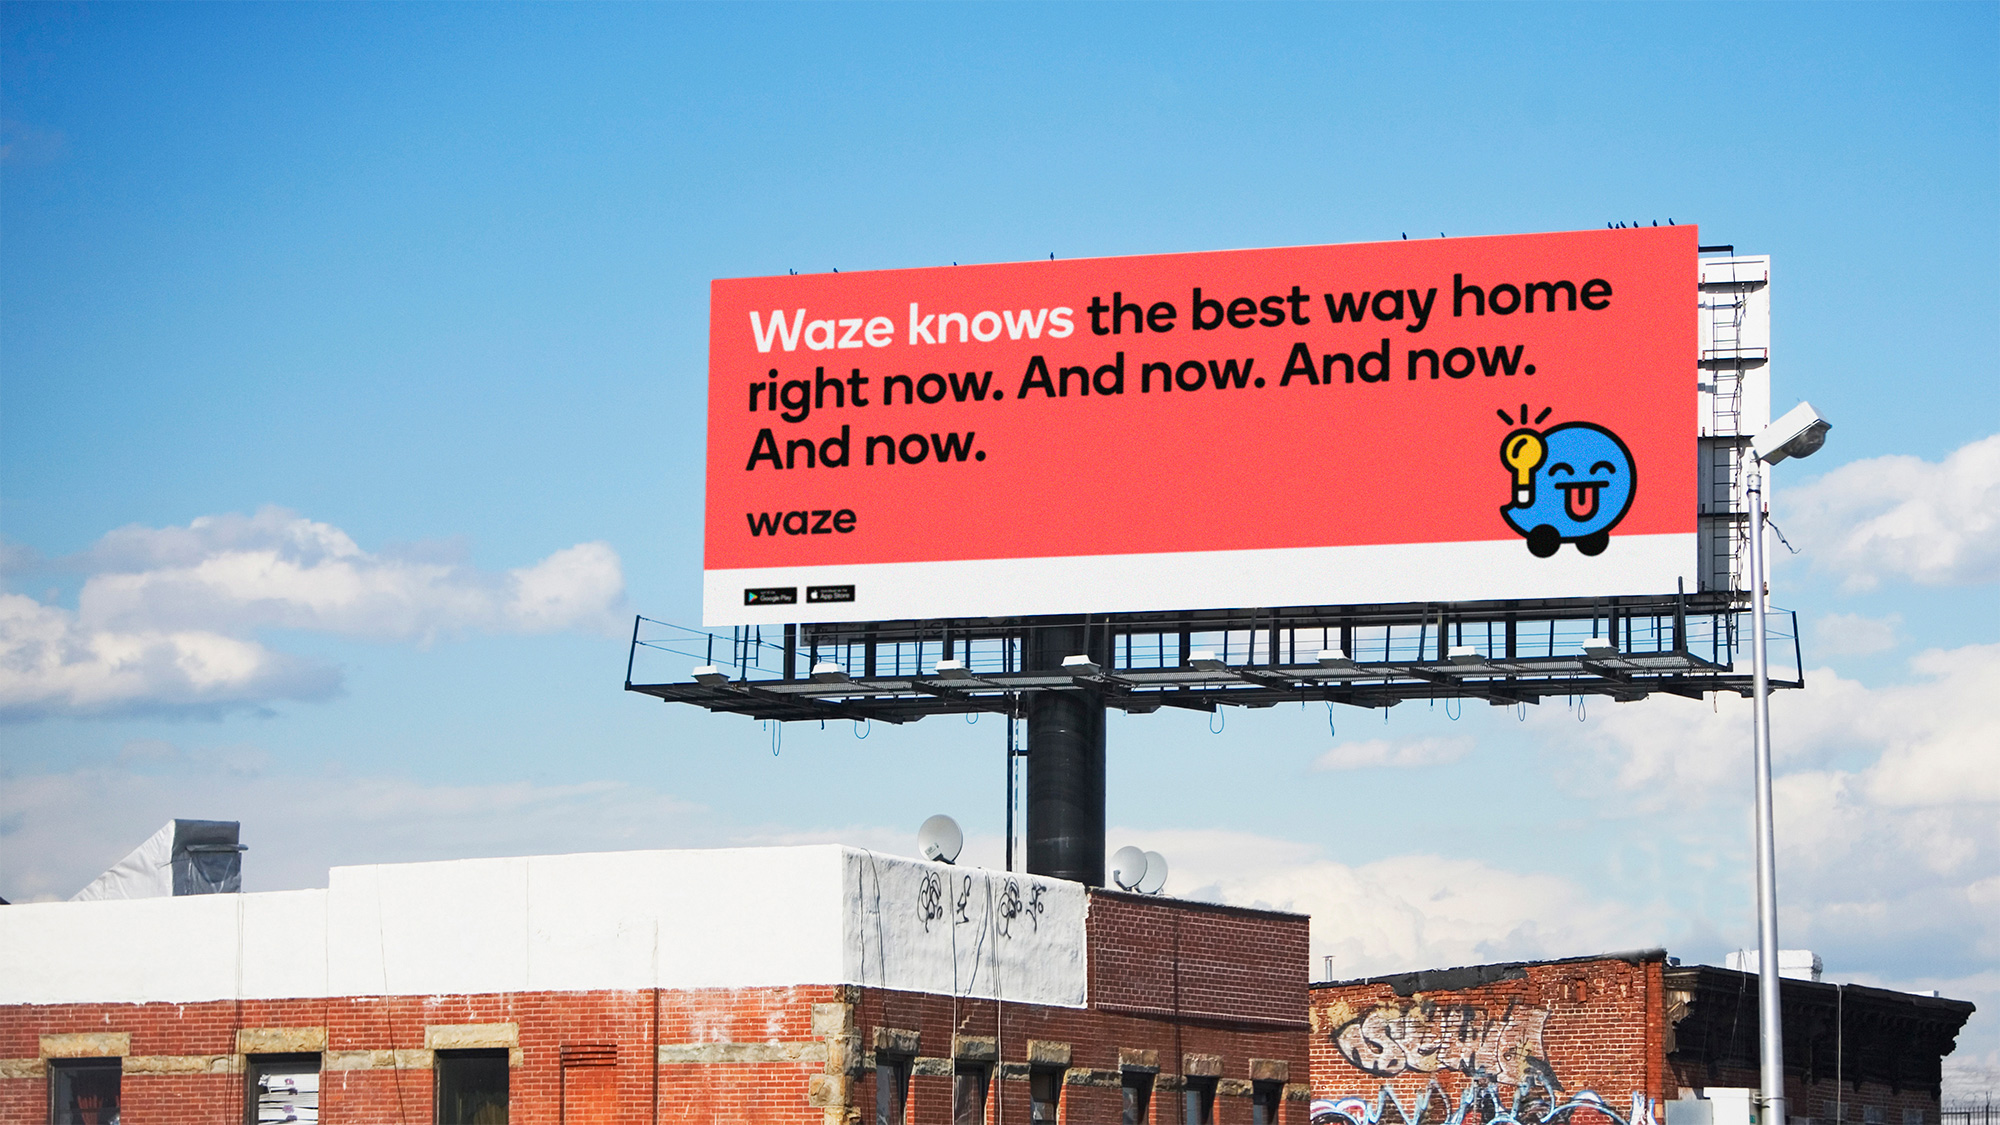 Waze Knows U.S. Out-of-Home Campaign